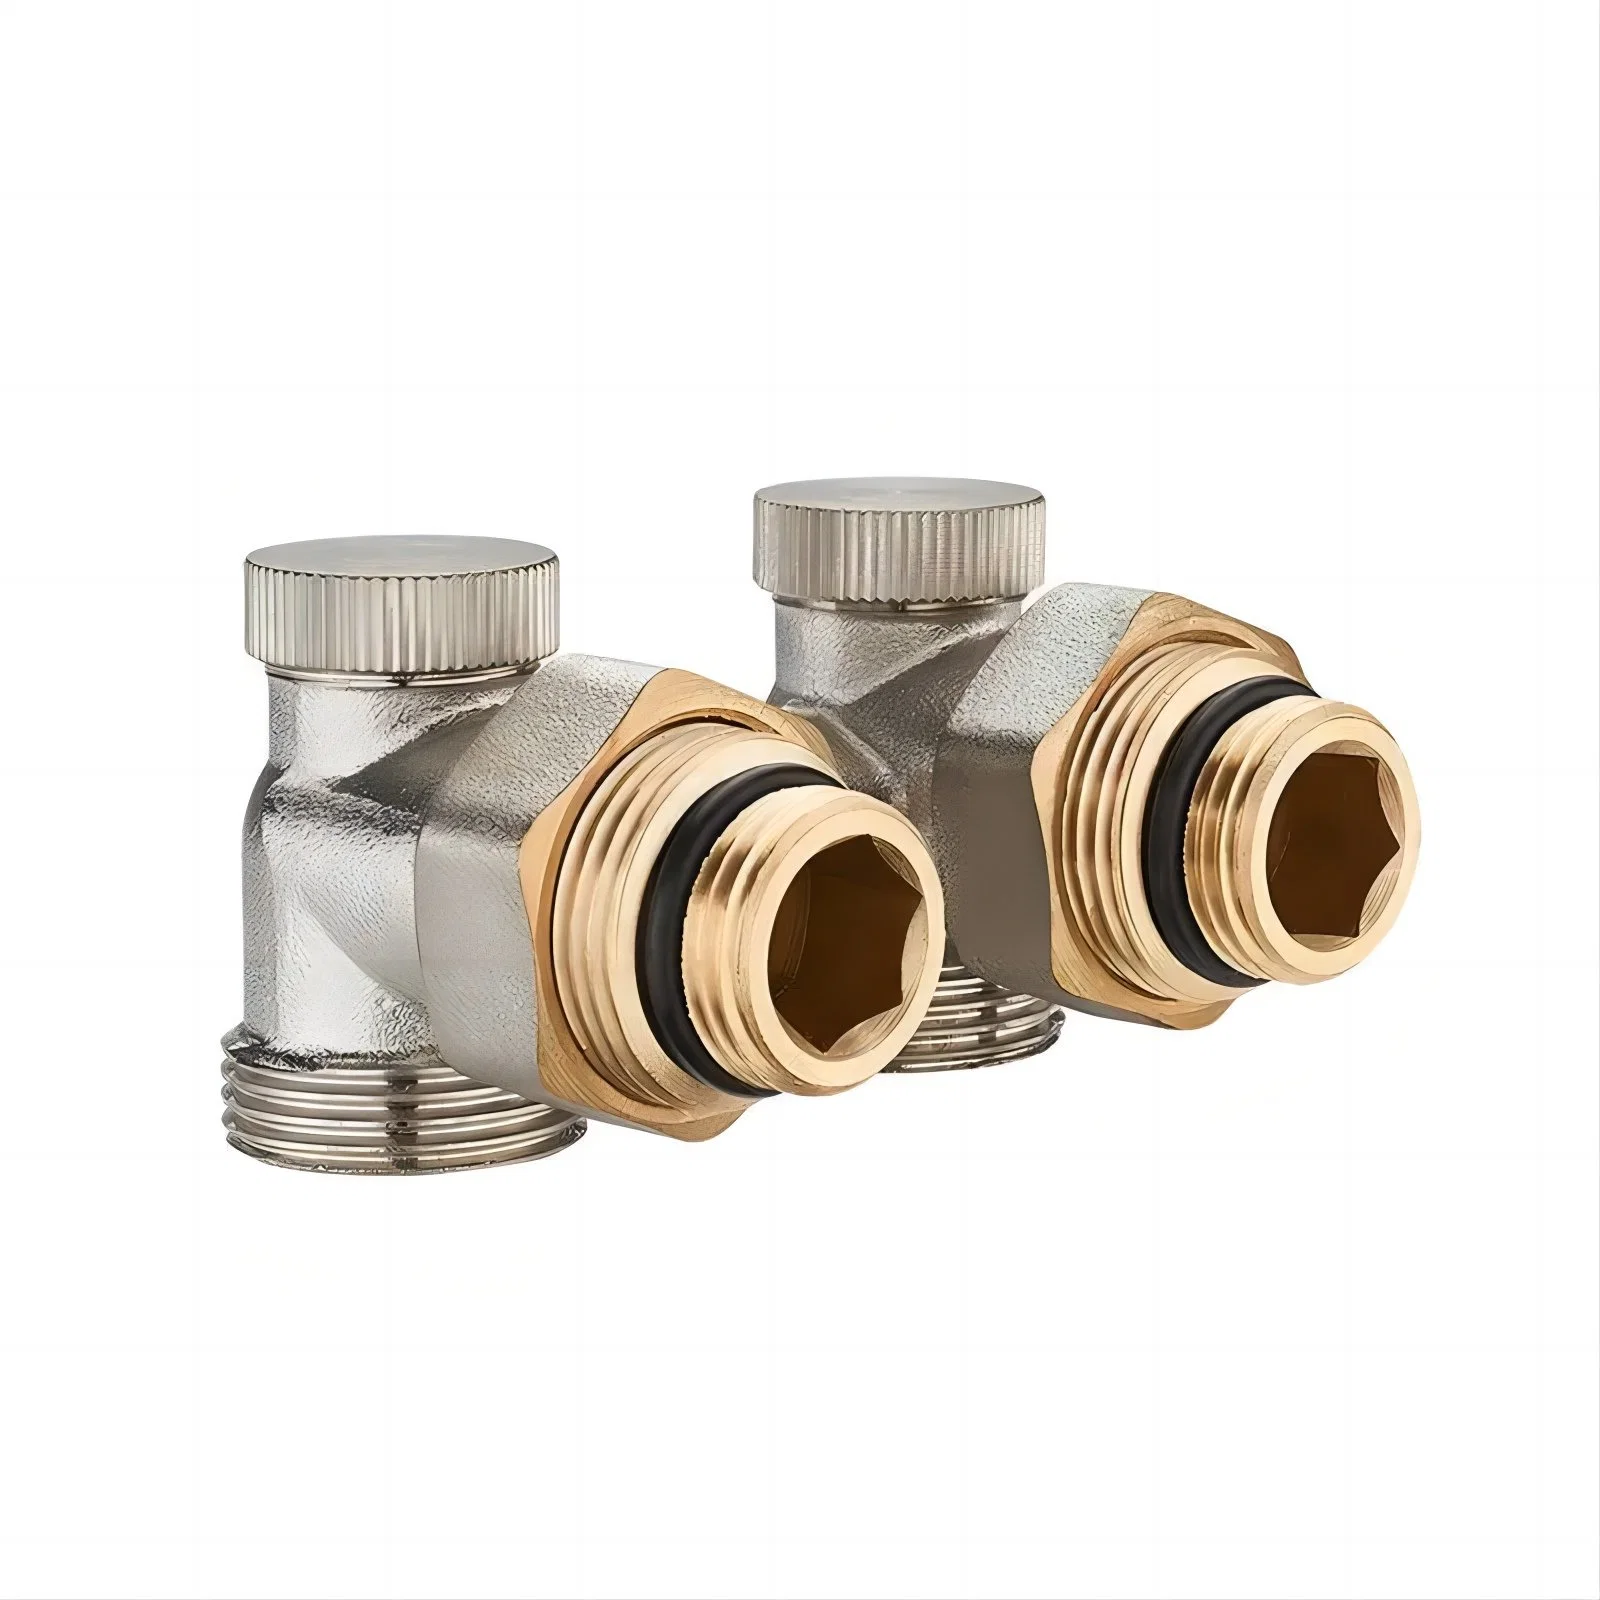 Aluminum-Plastic Pipe Direct Head Clamp Set All-Copper Pipe Fittings Union Floor Heating Pipe Joint Ball Wholesale/Supplier